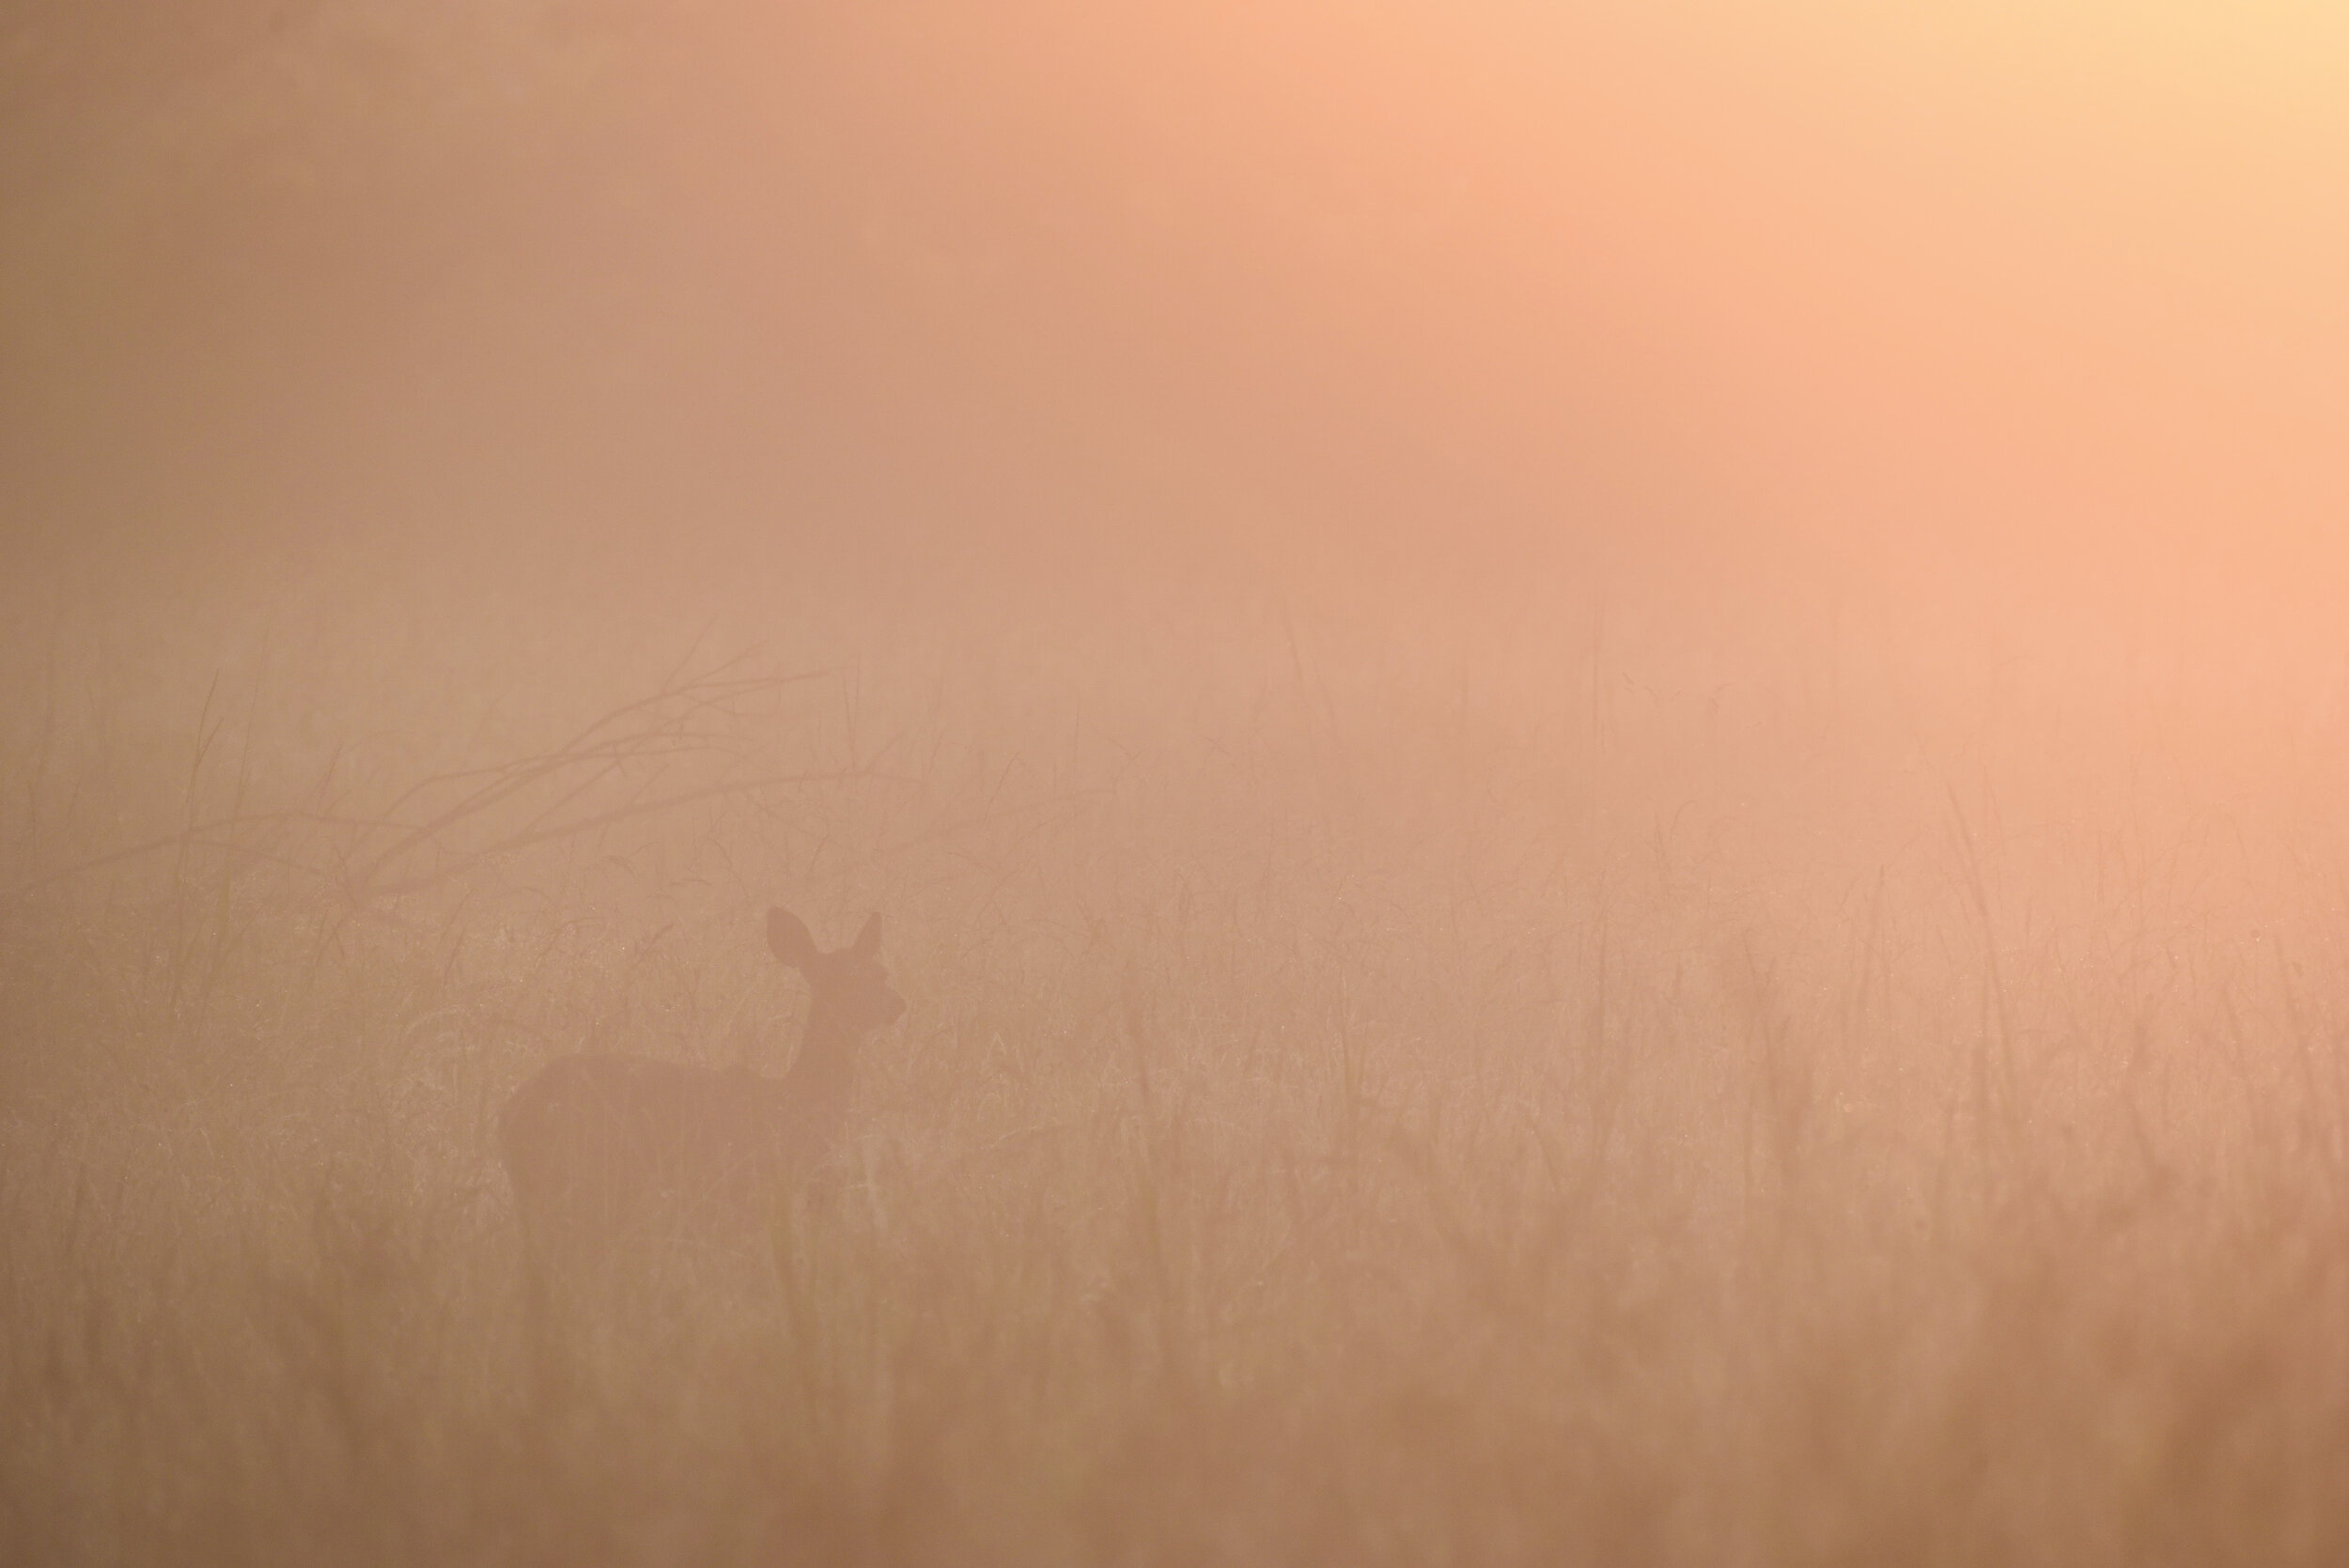  A white-tailed deer grazes at dawn in Kennesaw Mountain National Battlefield Park, Georgia. White-tailed deer nearly went locally extinct in Georgia and other parts of the southeastern United States in the early 1900s due to overhunting for subsiste